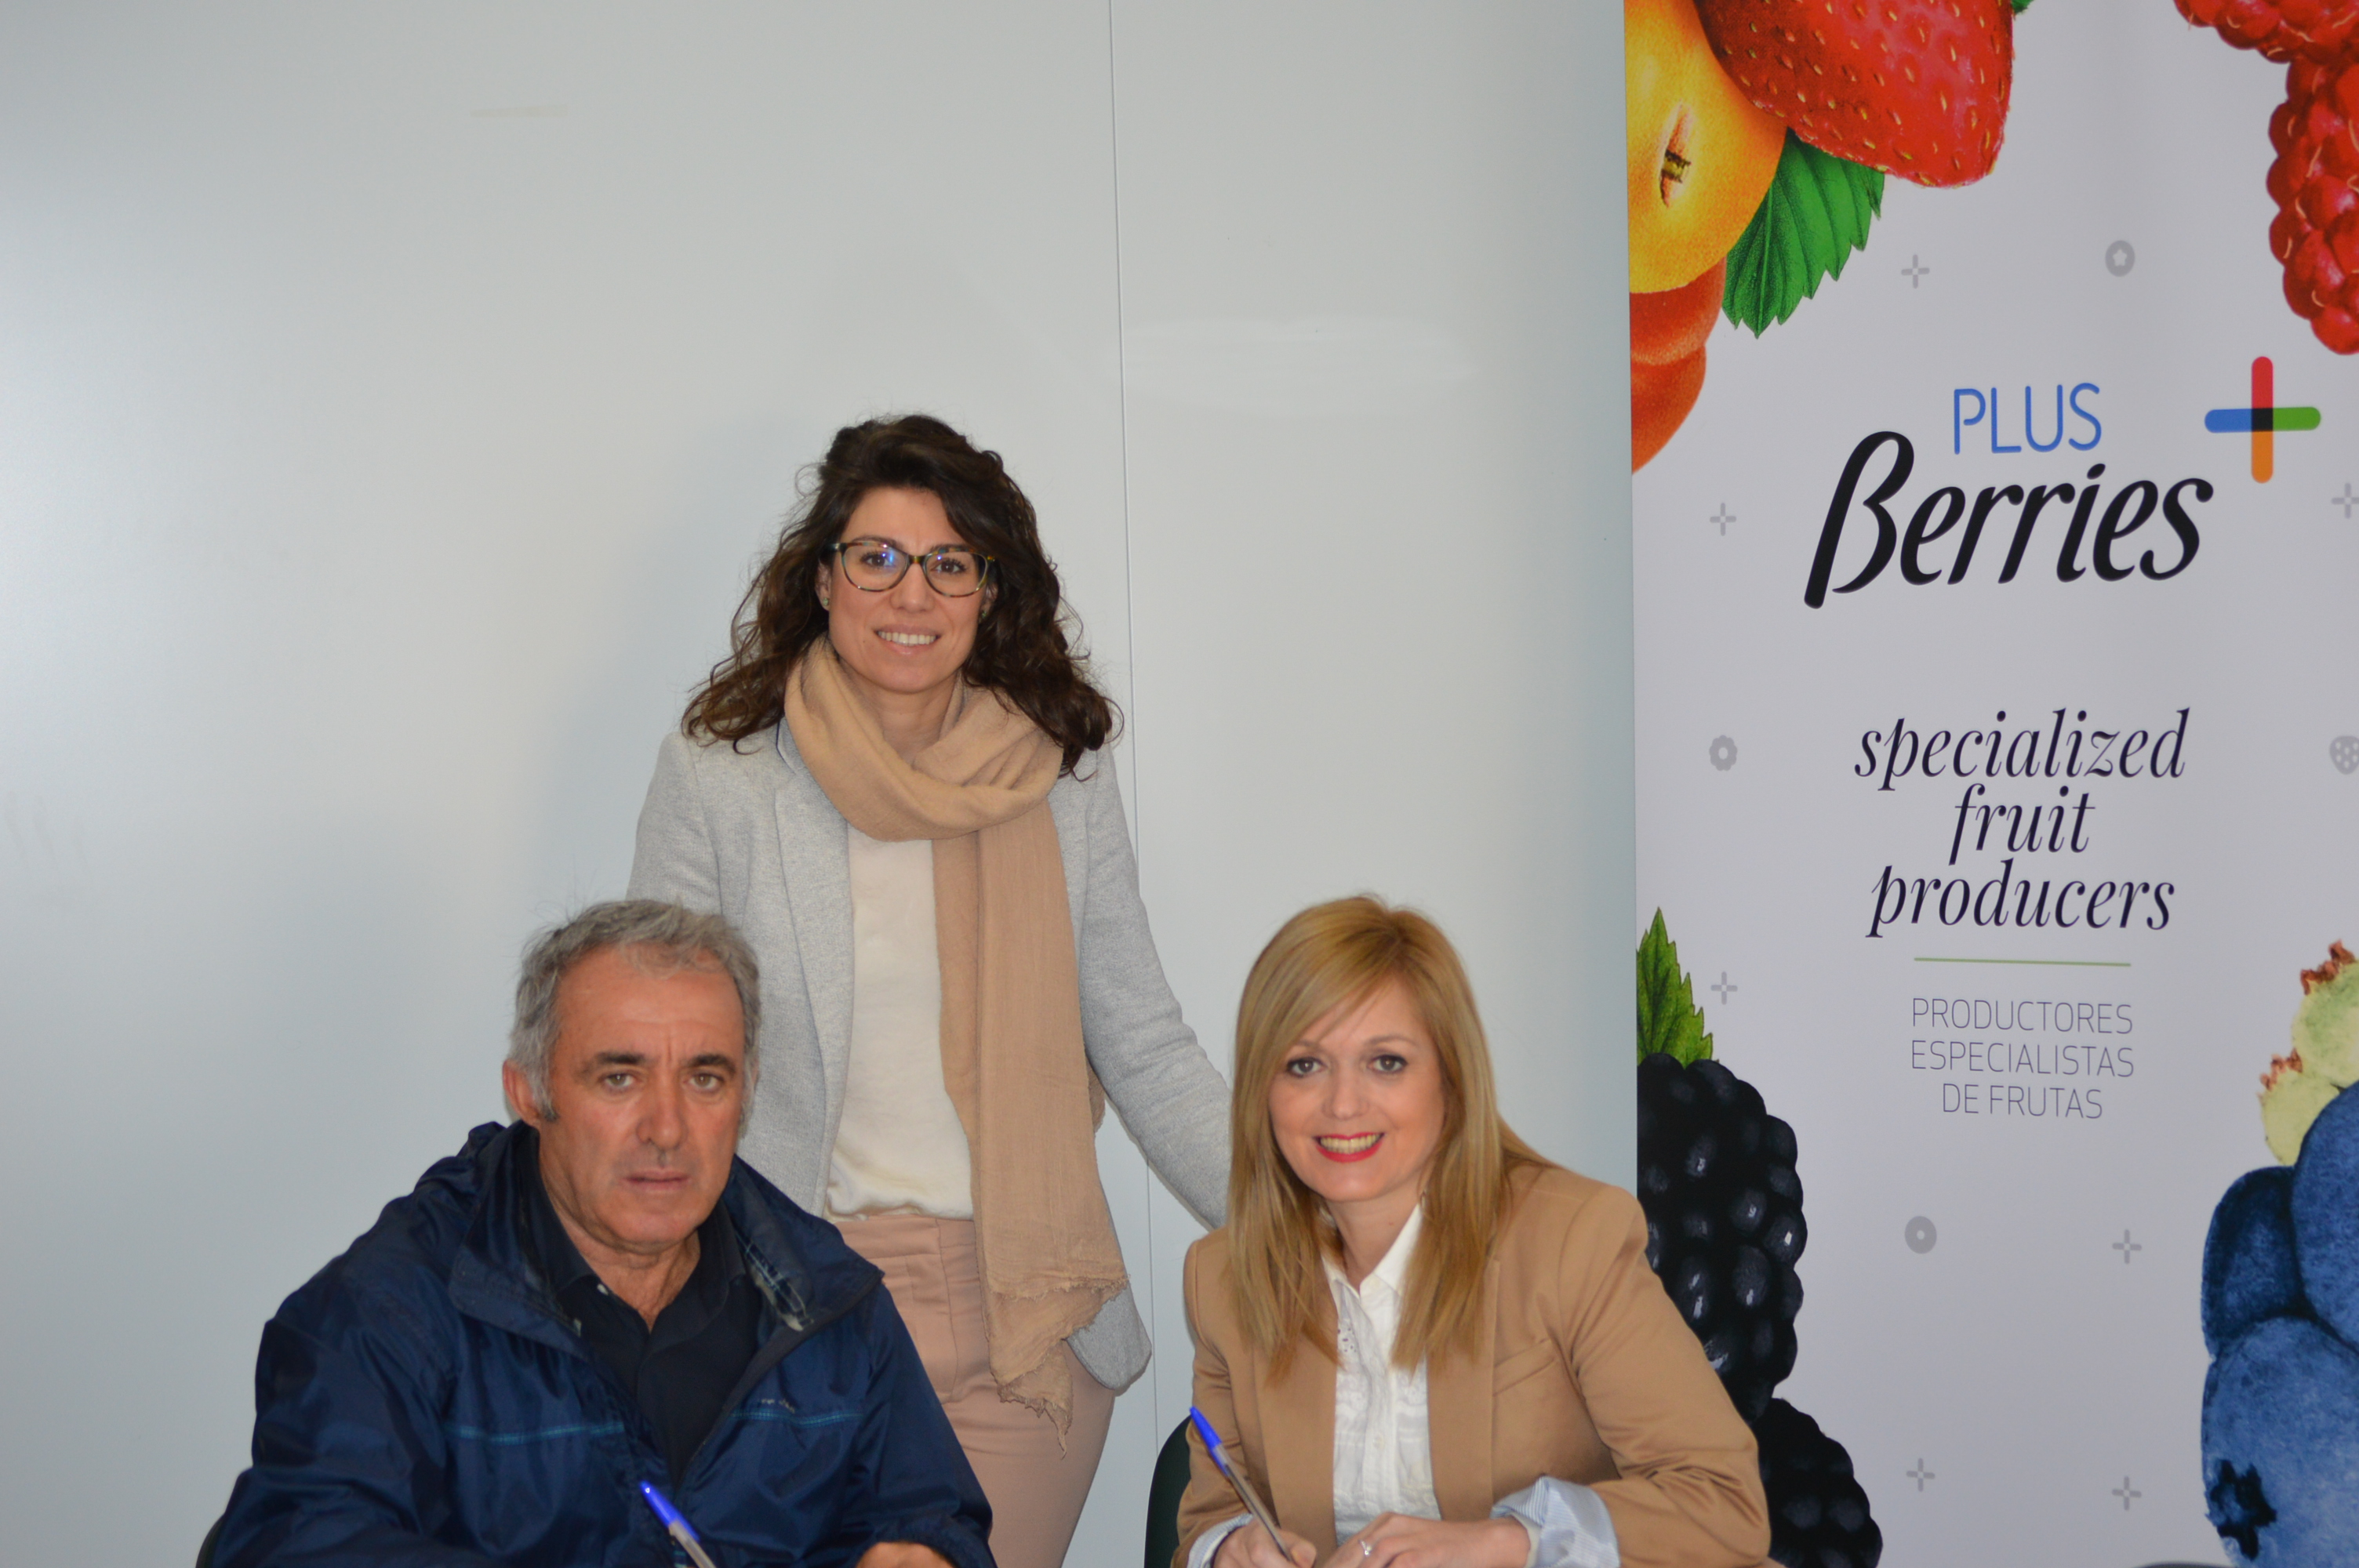 AGREEMENT OF COLLABORATION WITH COCEMFE HUELVA